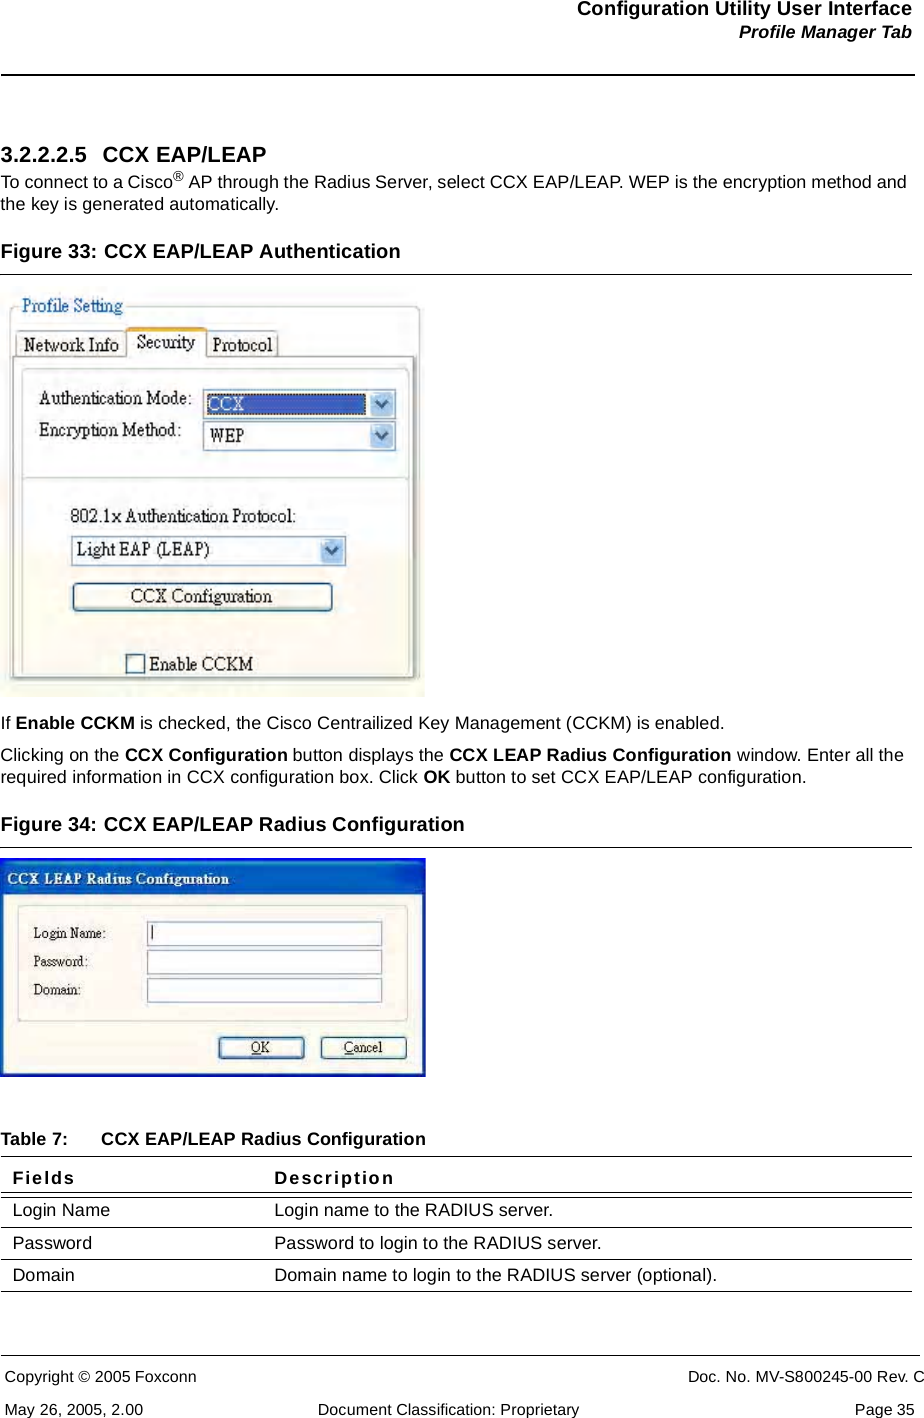 Configuration Utility User InterfaceProfile Manager TabCopyright © 2005 Foxconn CONFIDENTIAL Doc. No. MV-S800245-00 Rev. CMay 26, 2005, 2.00 Document Classification: Proprietary  Page 353.2.2.2.5 CCX EAP/LEAPTo connect to a Cisco® AP through the Radius Server, select CCX EAP/LEAP. WEP is the encryption method and the key is generated automatically.Figure 33: CCX EAP/LEAP AuthenticationIf Enable CCKM is checked, the Cisco Centrailized Key Management (CCKM) is enabled.Clicking on the CCX Configuration button displays the CCX LEAP Radius Configuration window. Enter all the required information in CCX configuration box. Click OK button to set CCX EAP/LEAP configuration.Figure 34: CCX EAP/LEAP Radius Configuration Table 7: CCX EAP/LEAP Radius ConfigurationFields DescriptionLogin Name Login name to the RADIUS server.Password Password to login to the RADIUS server.Domain Domain name to login to the RADIUS server (optional).